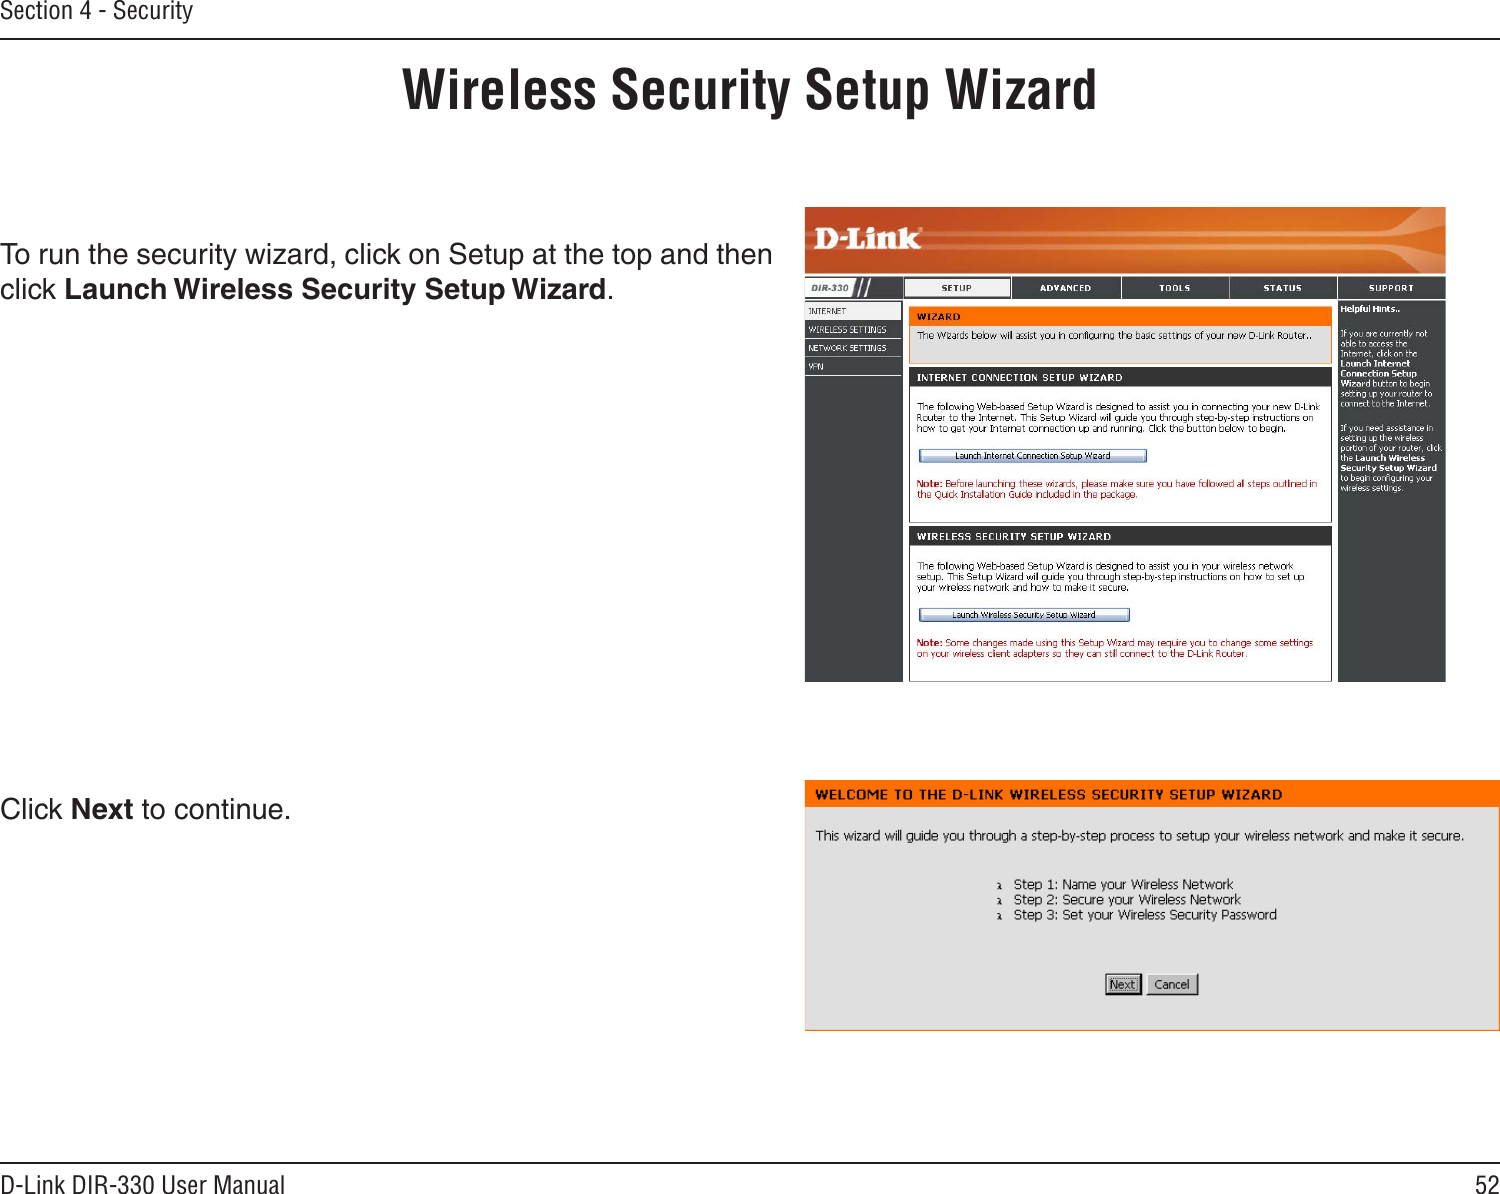 52D-Link DIR-330 User ManualSection 4 - SecurityWireless Security Setup WizardTo run the security wizard, click on Setup at the top and then click Launch Wireless Security Setup Wizard.Click Next to continue.